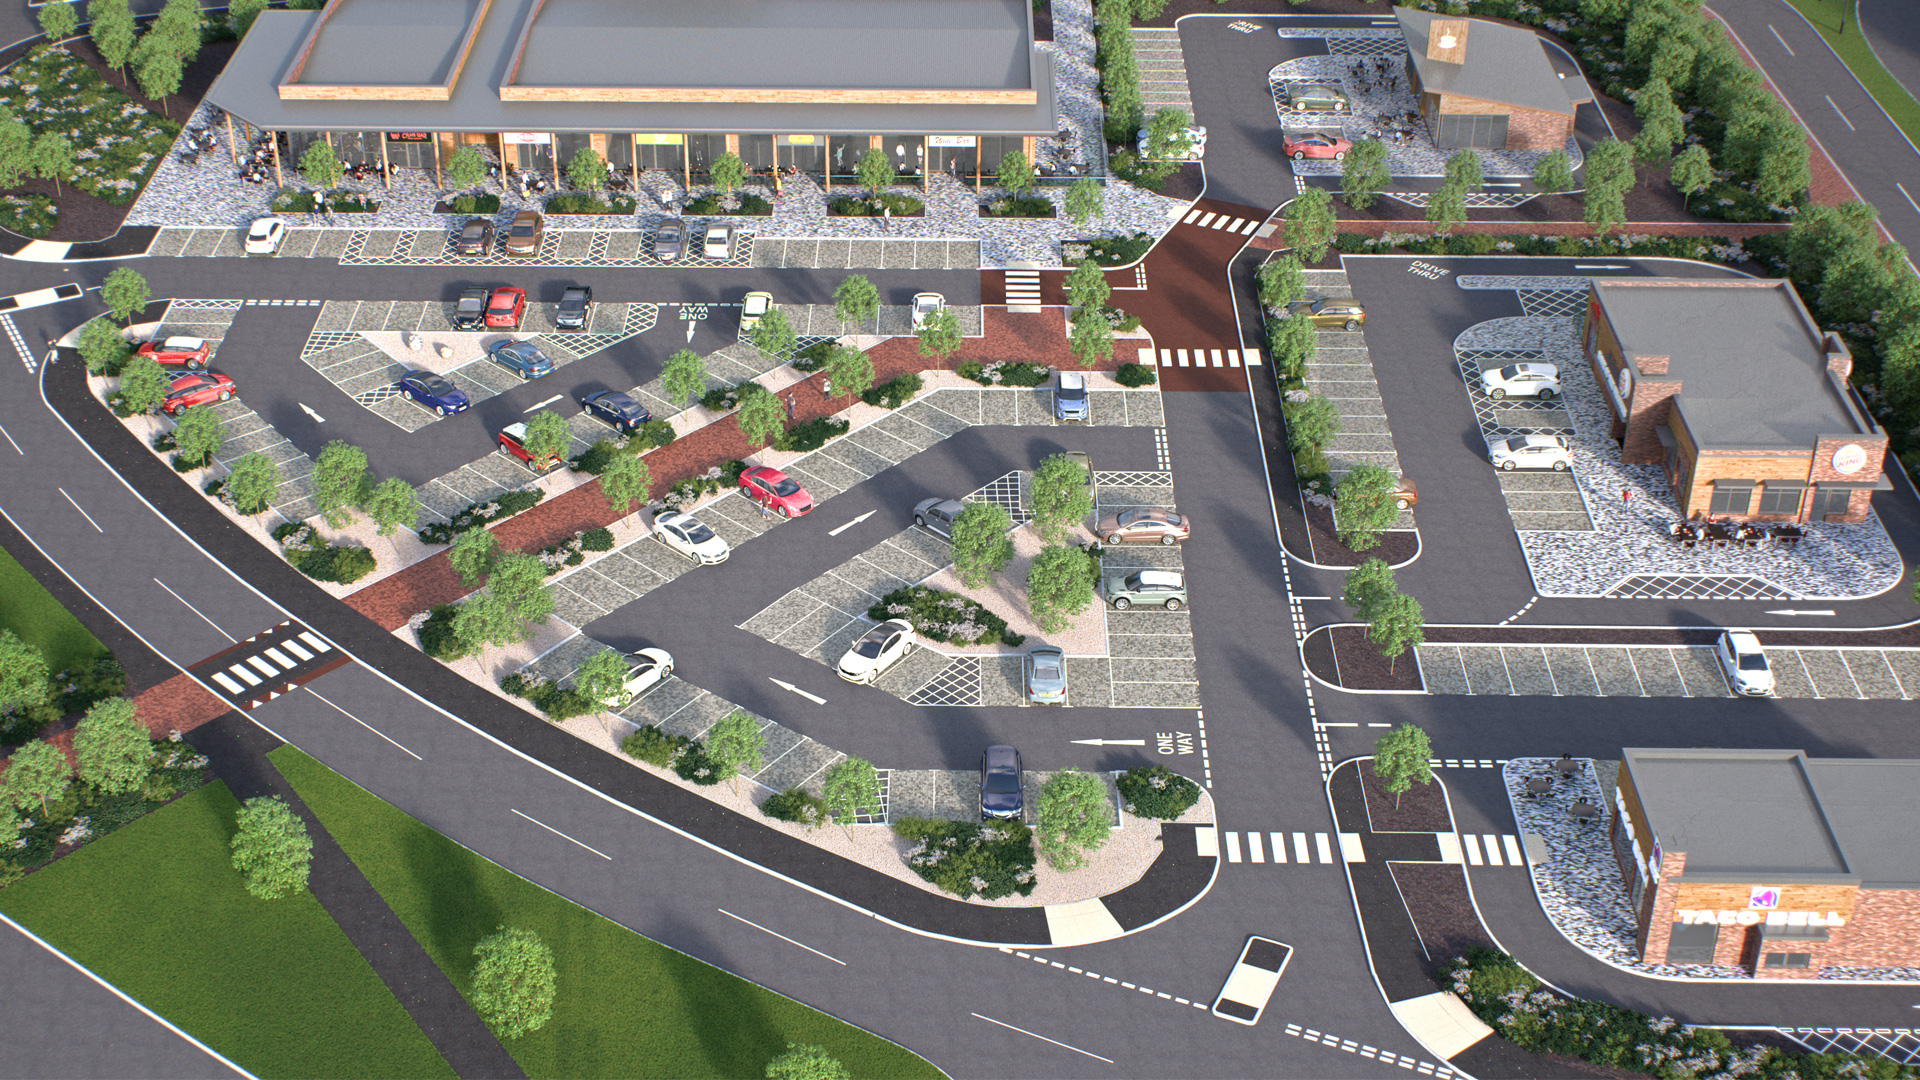 DCS Taco Bell, Burger King and Dunkin Donuts at Herten Triangle Doncaster Lakeside 3D